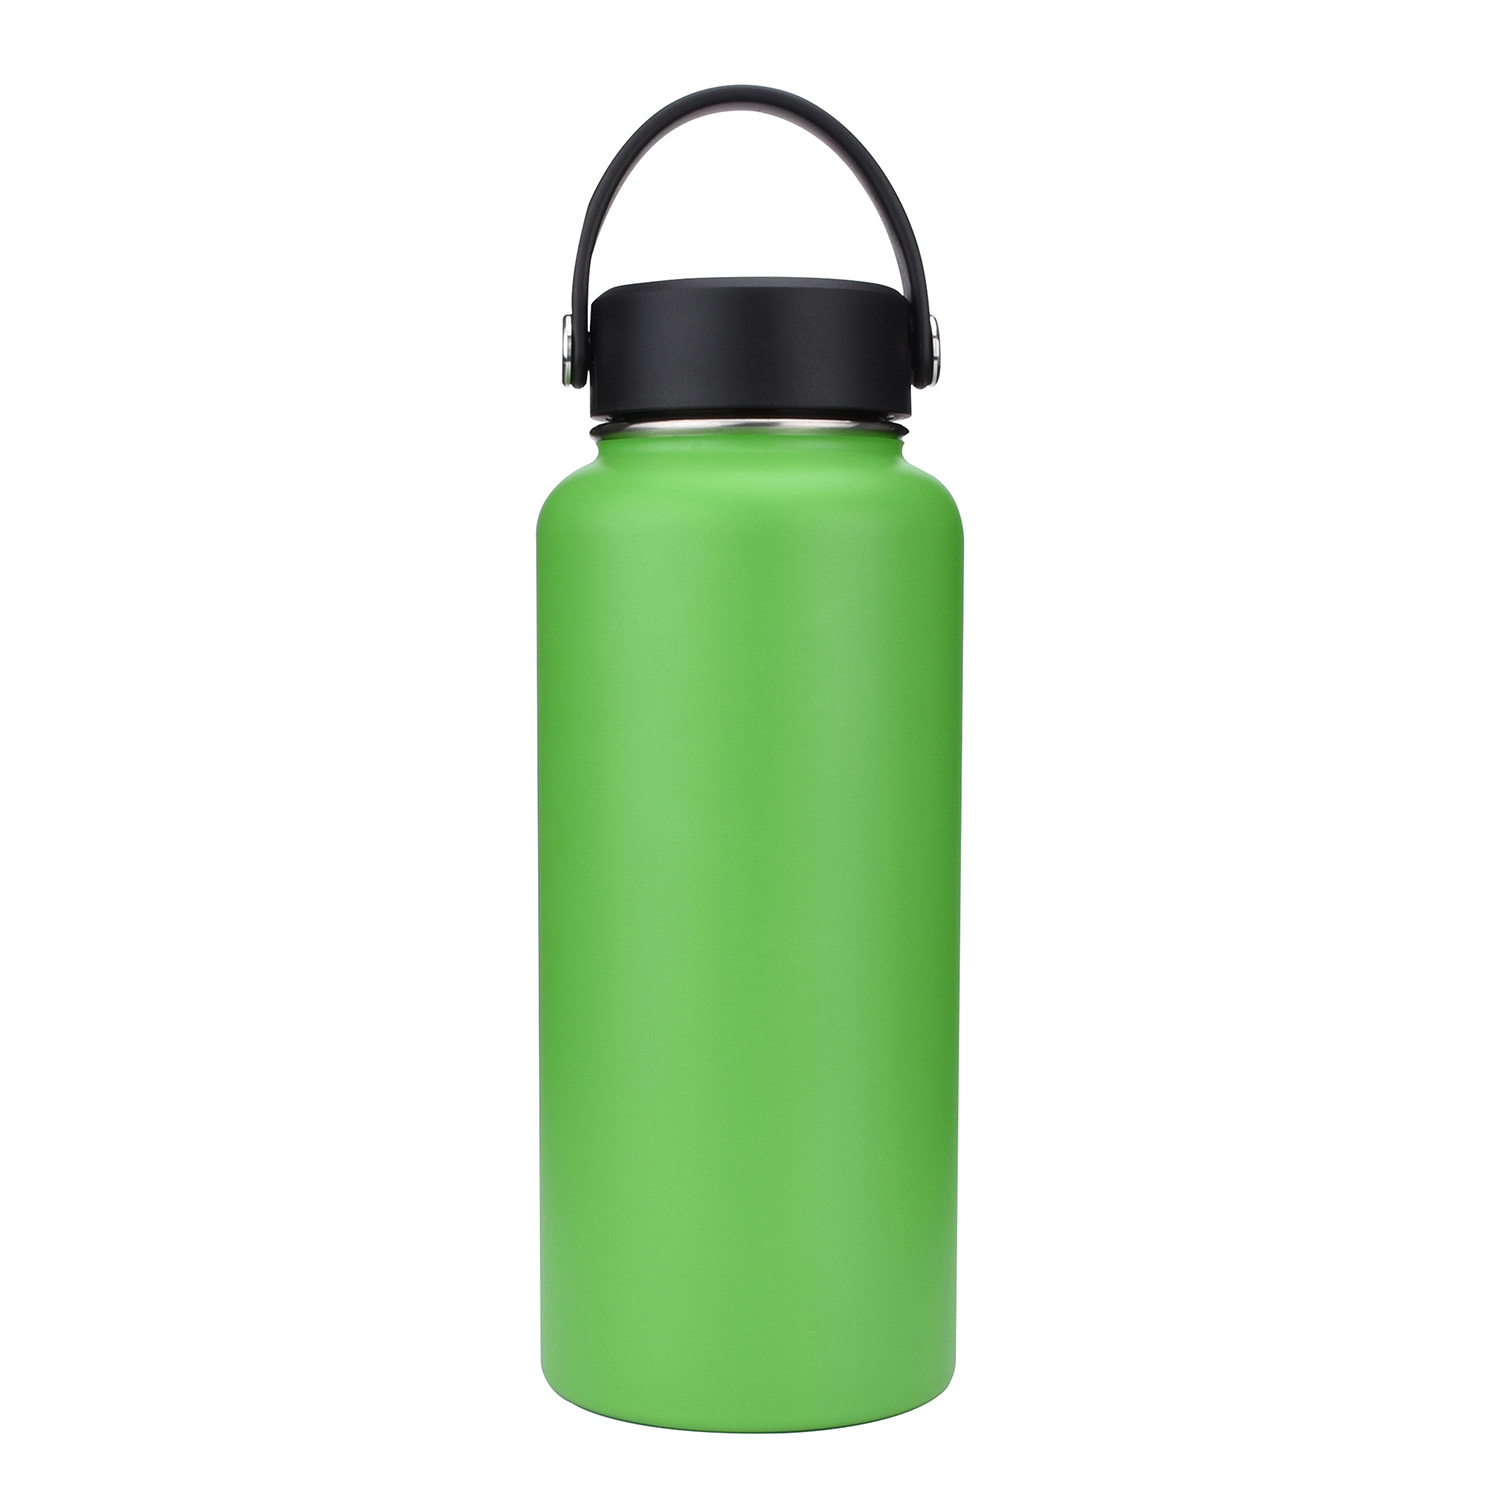 Why has my stainless steel flask thermos bottle hydro flask